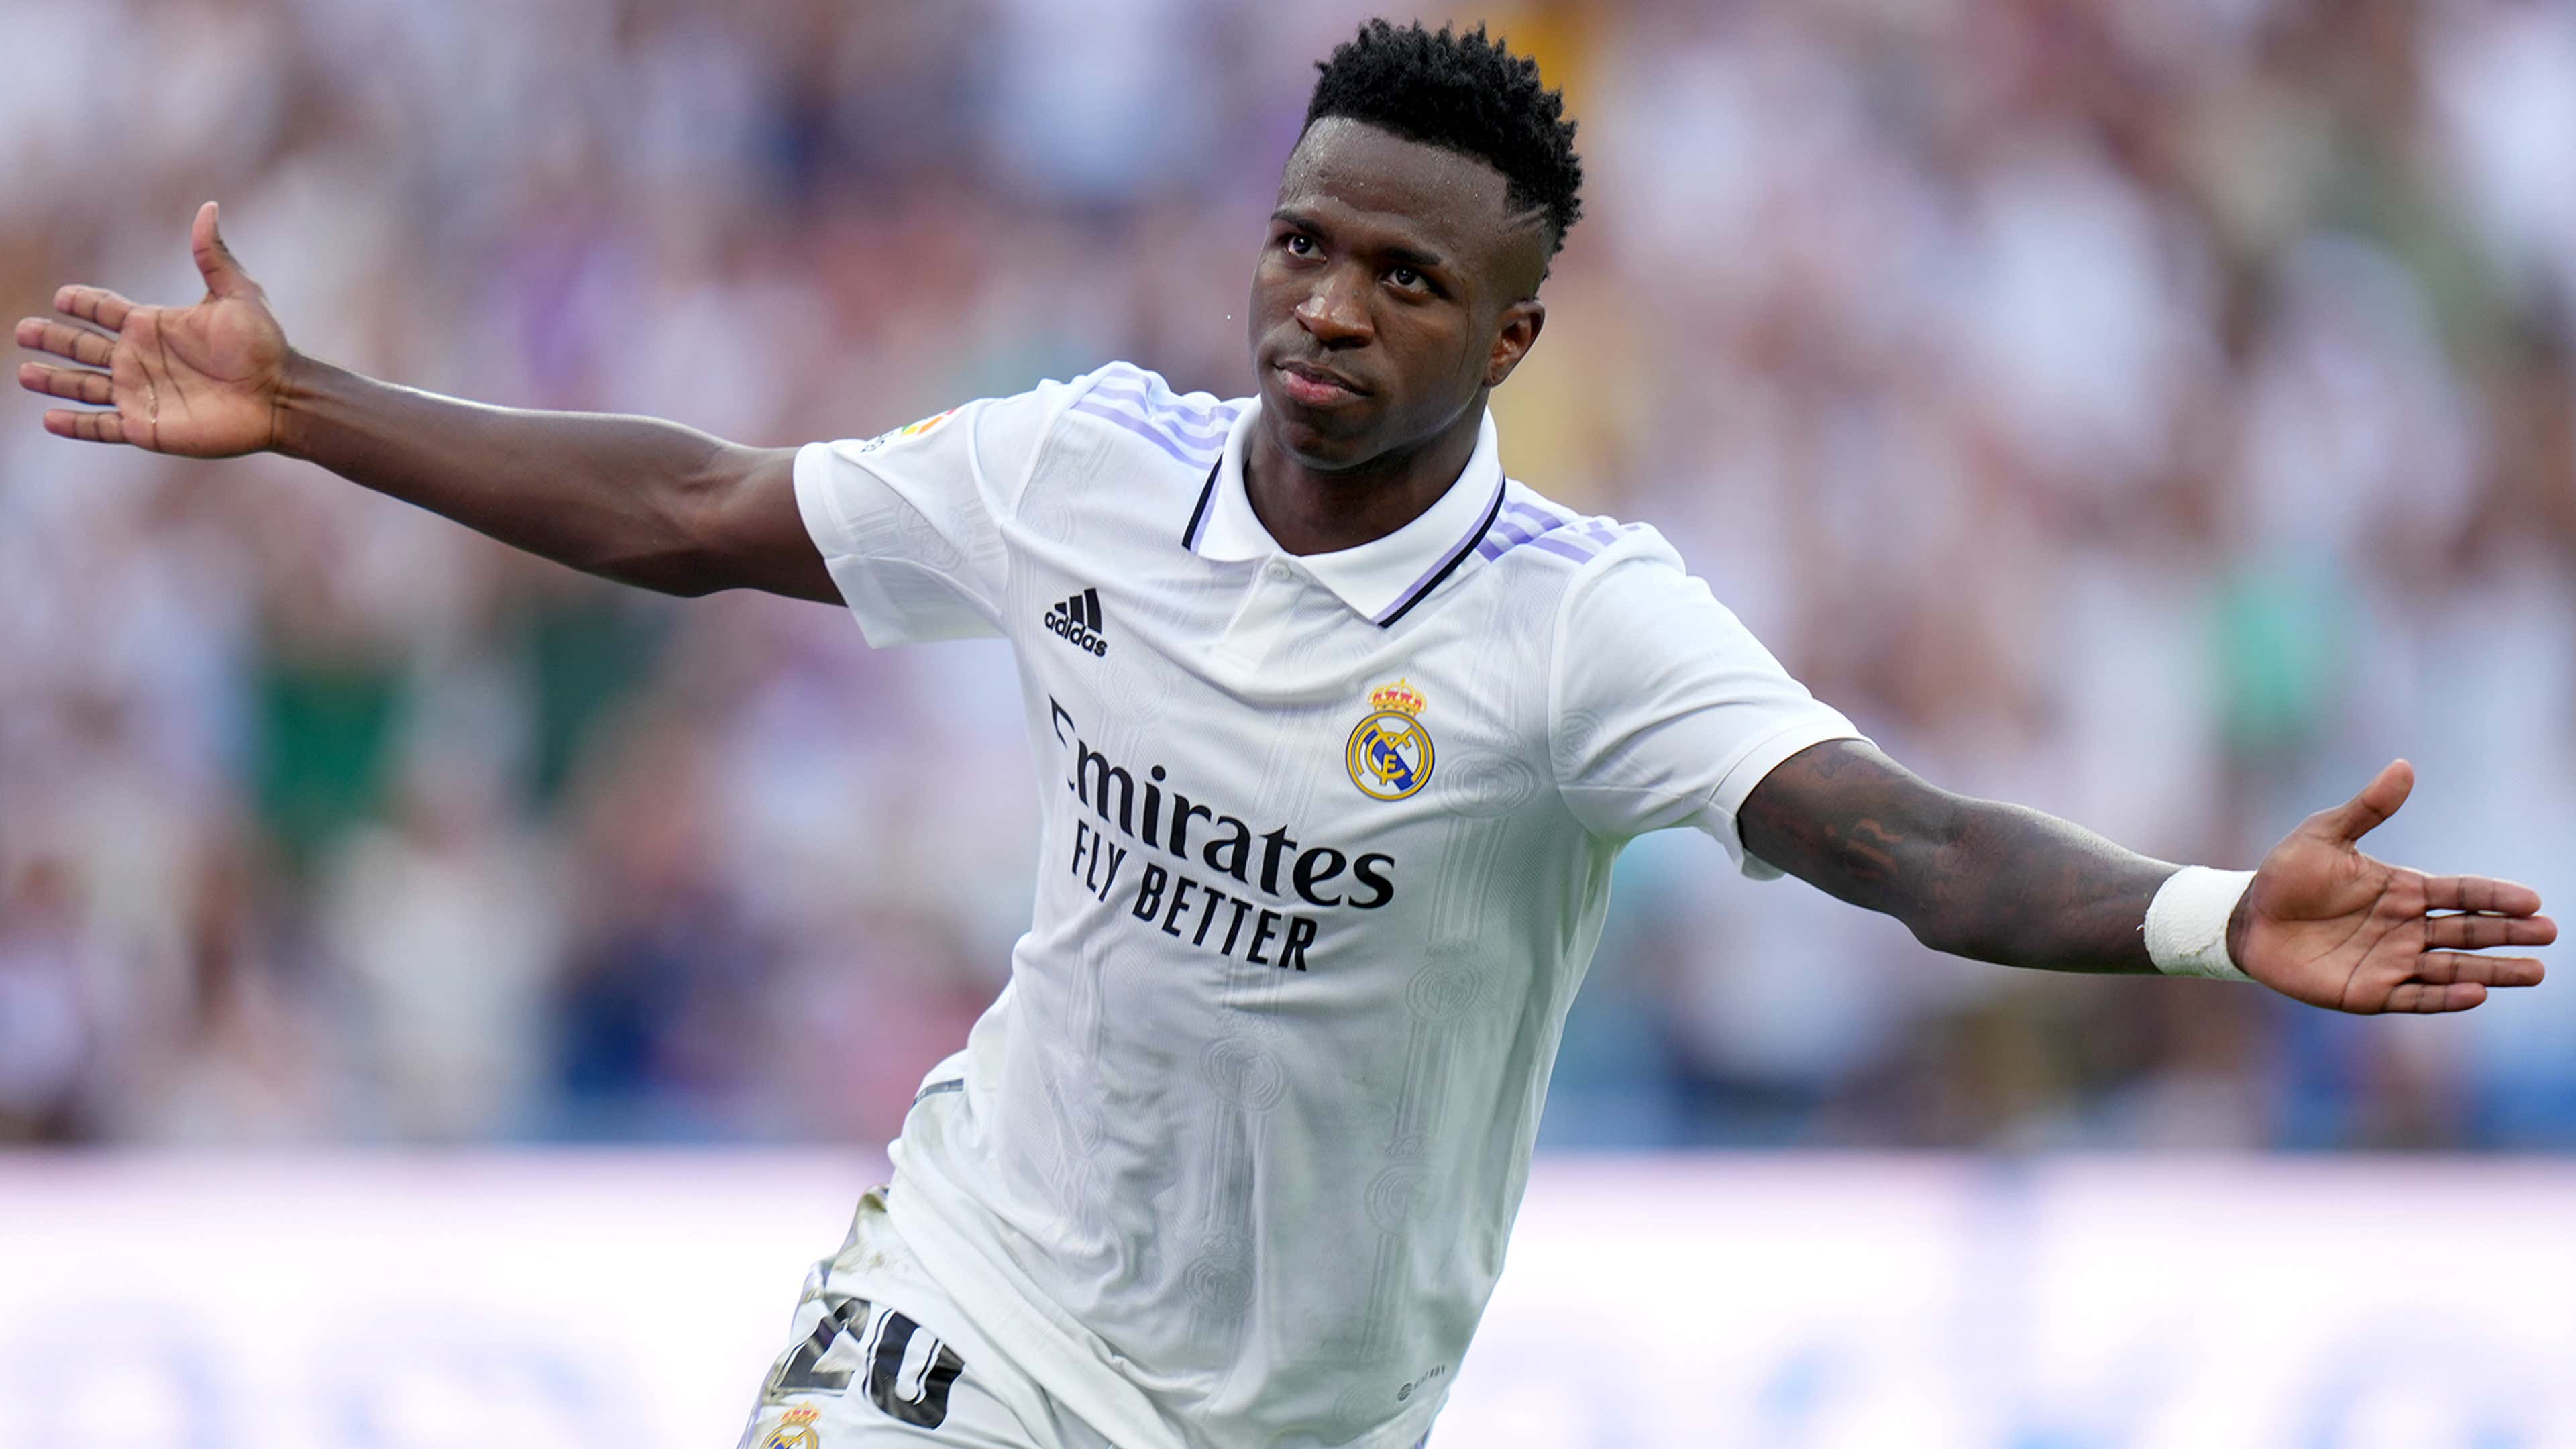 Real Madrid issue strong statement after Vinicius Jr. gets